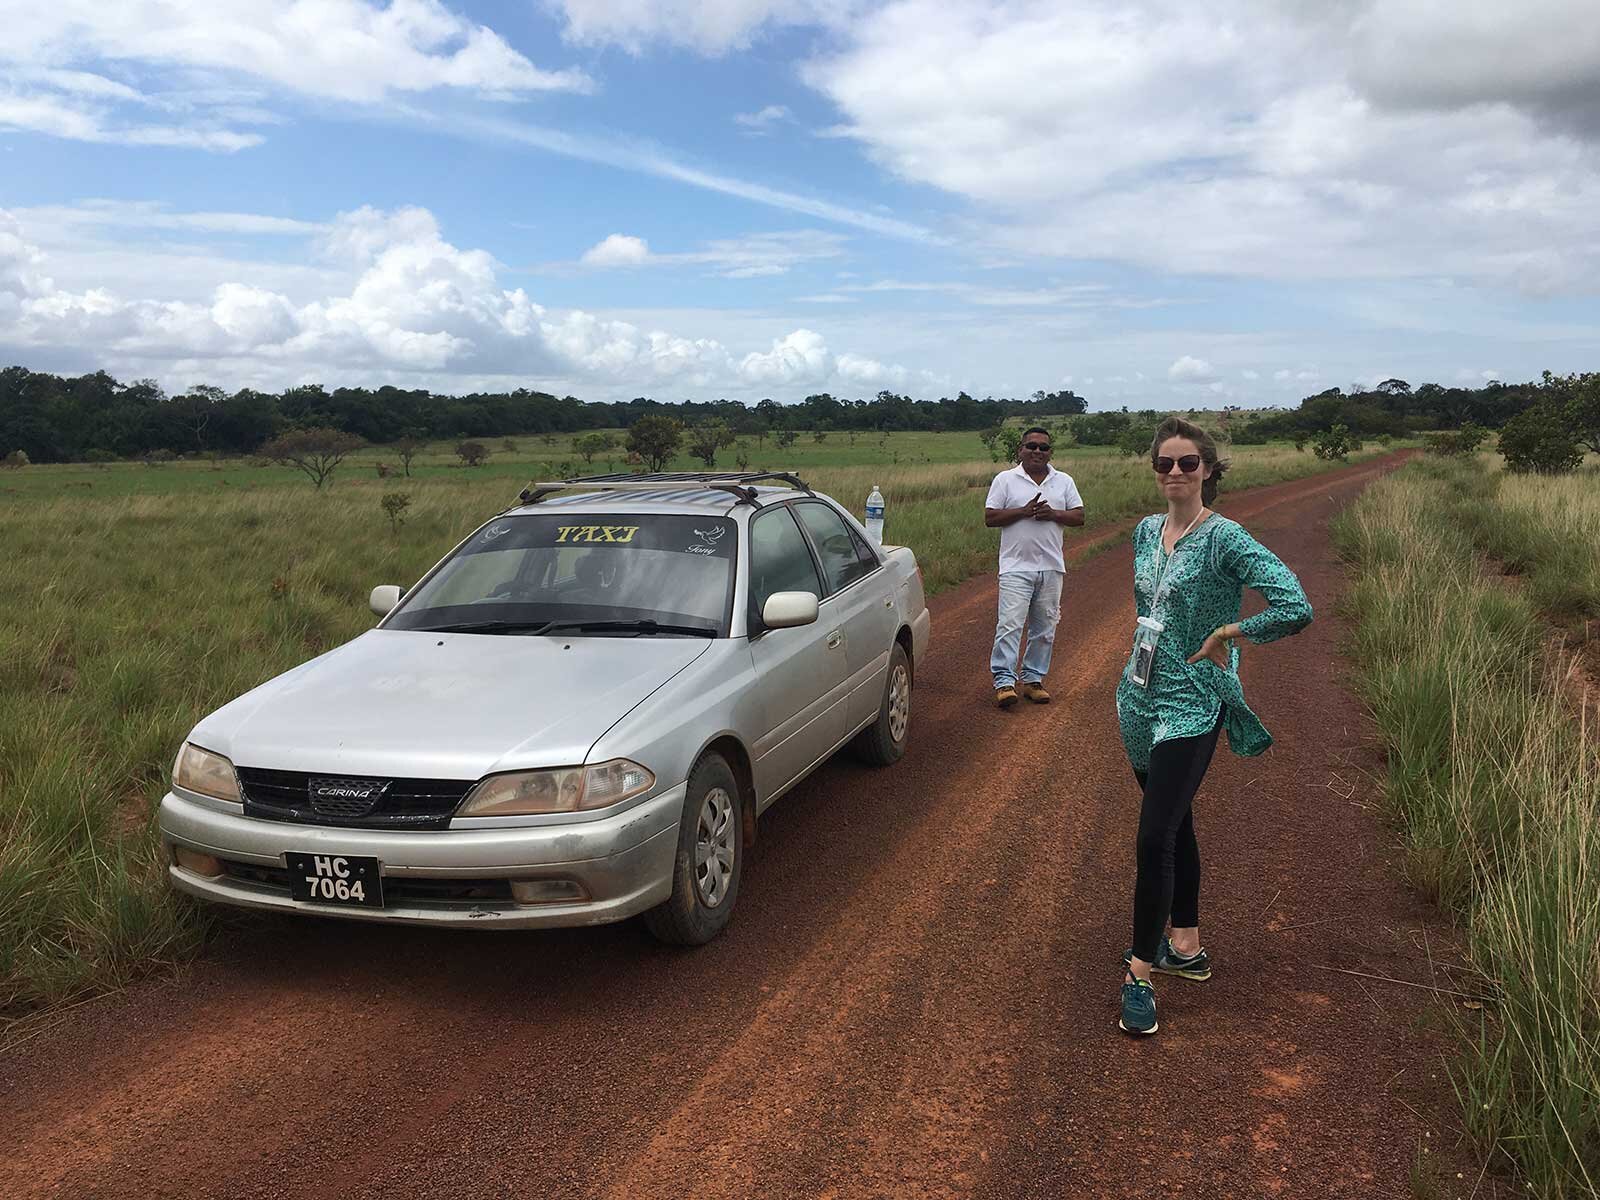  Tony is the taxi driver taking Tina and I from the border to Yupukari. Instead of the 4X4 I was promised, he turned up in a battered Toyota Carina, with a “Tony” sticker on the front windscreen and Kenny Rogers blaring out of tinny speakers. I spott